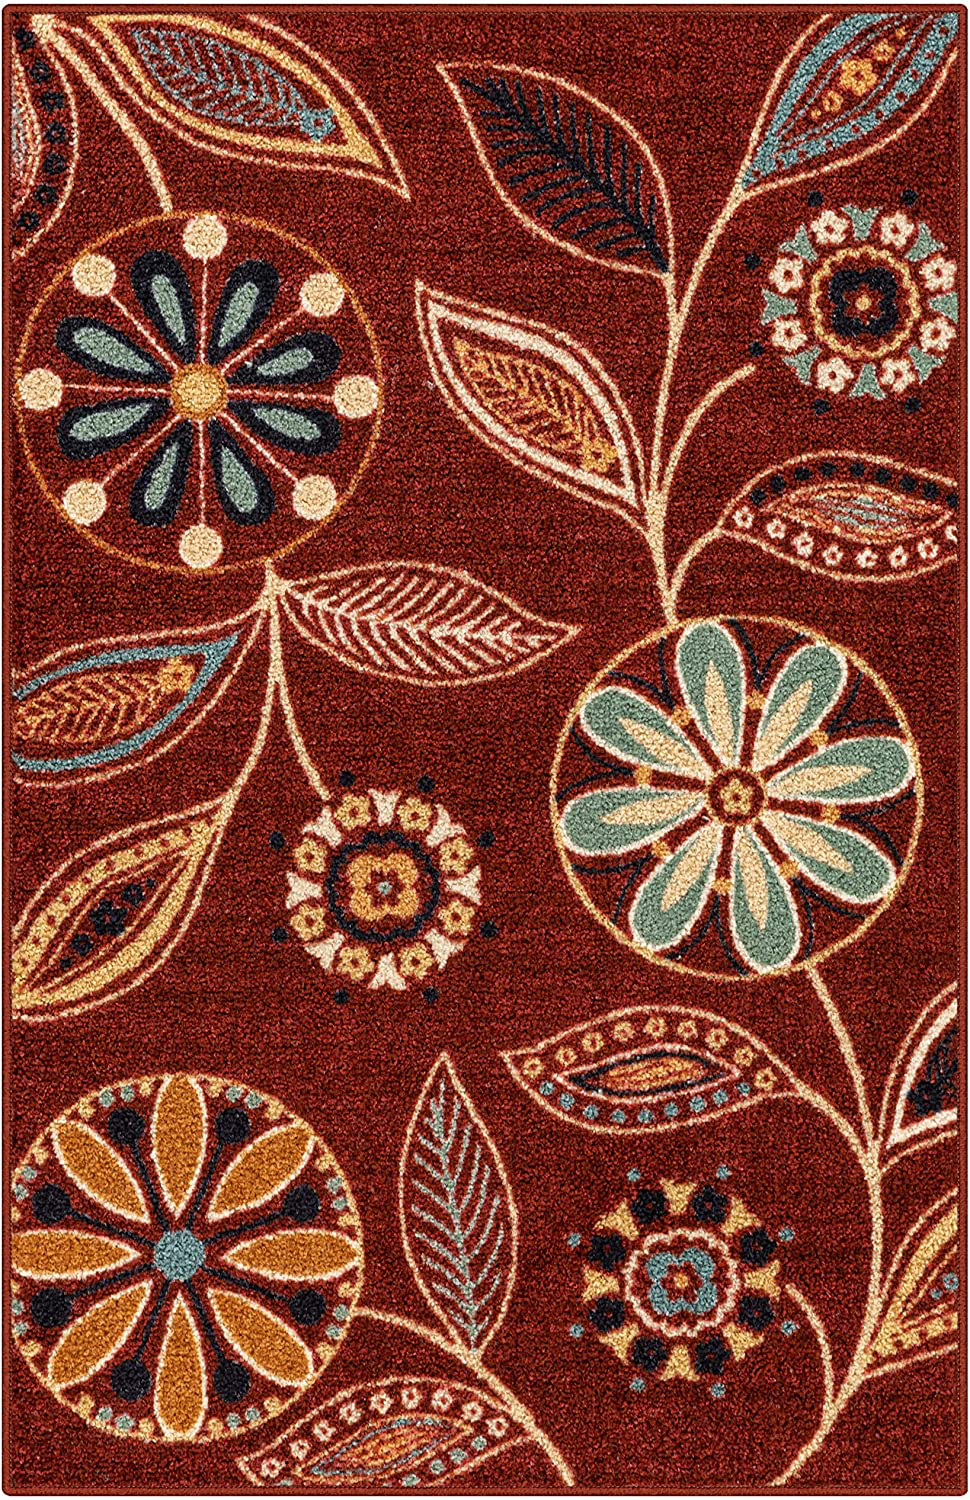 Maples Rugs Reggie Floral Kitchen Rugs Non Skid Accent Area Carpet [Made in USA], 2'6 x 3'10, Merlot